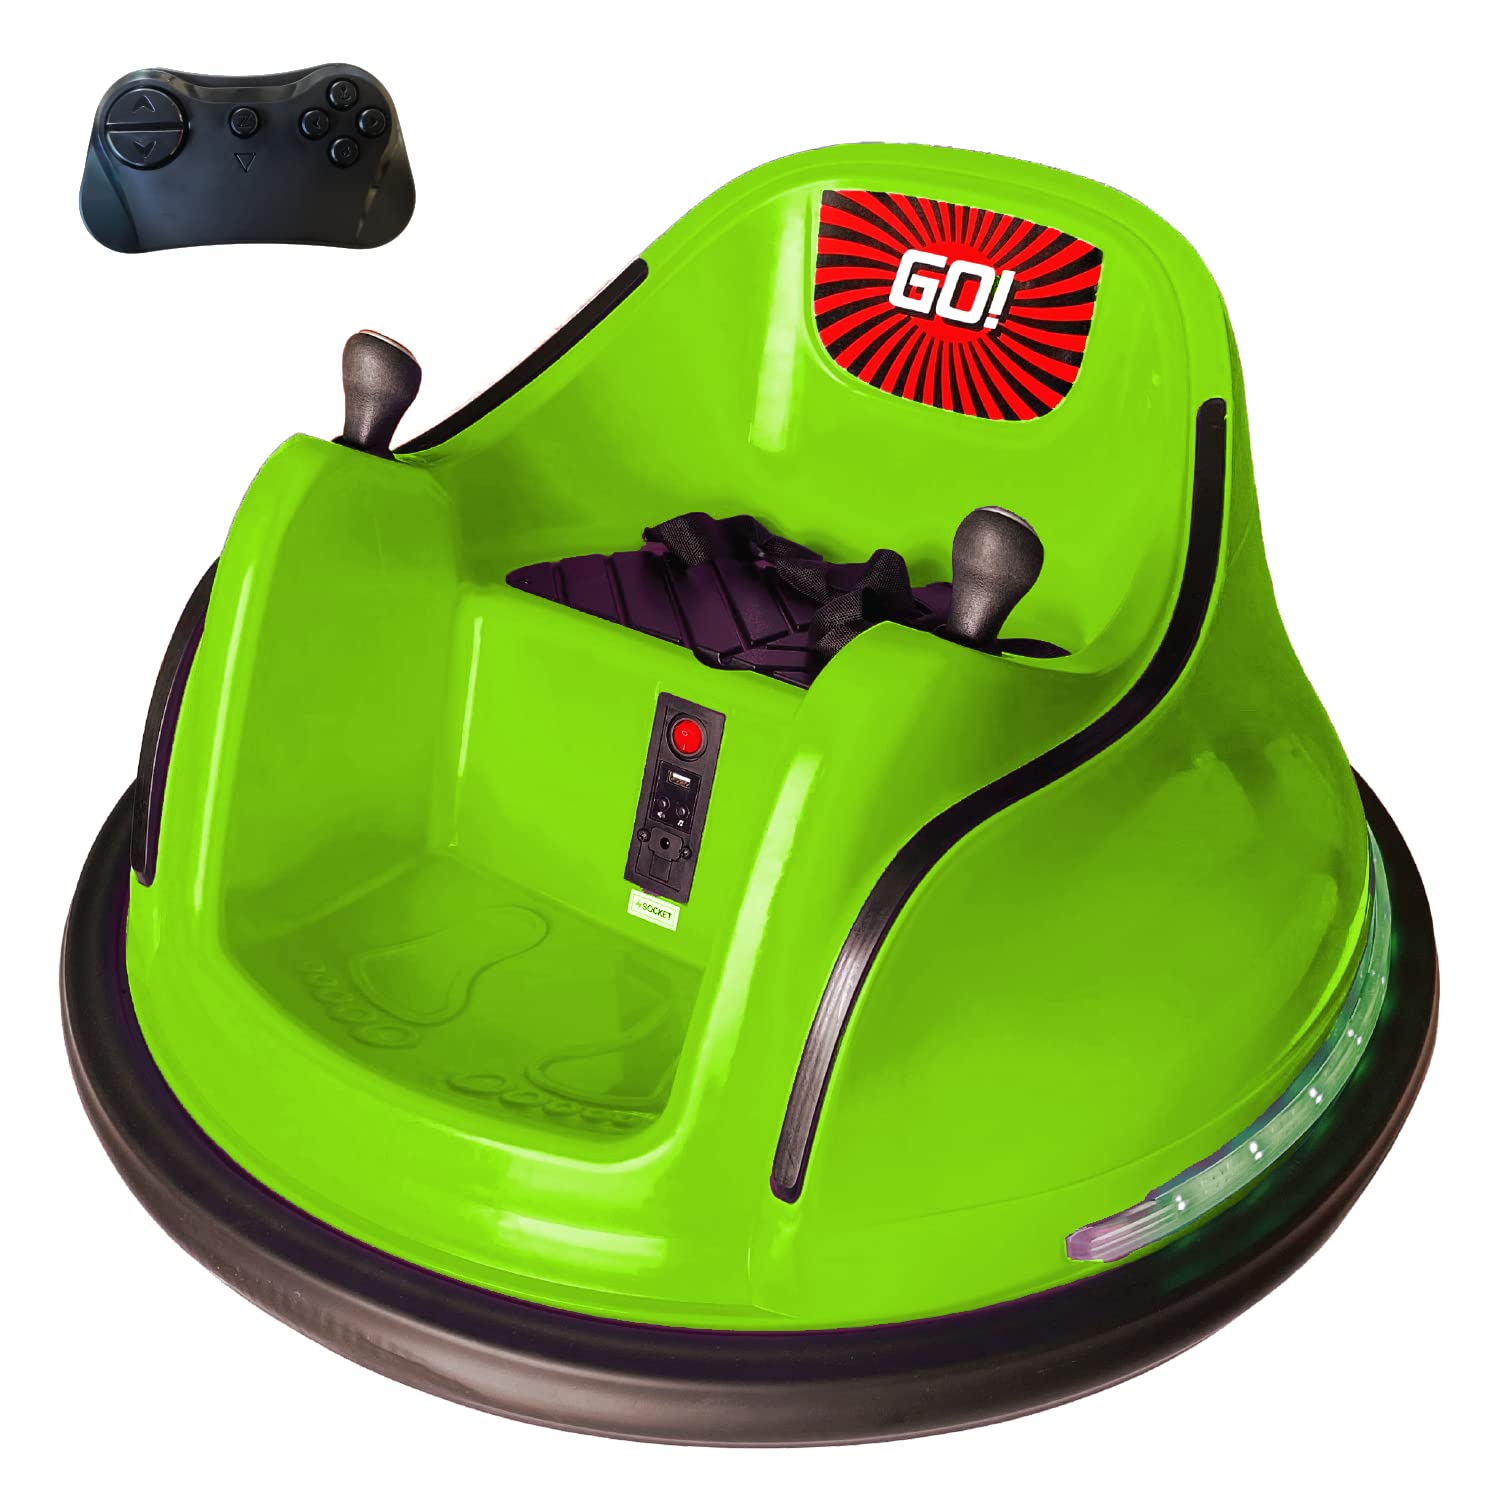 The Bubble Factory Kids Electric Bumper Car w/ Lights, Music, & Remote Control (Green, Pink) $85 + Free Shipping